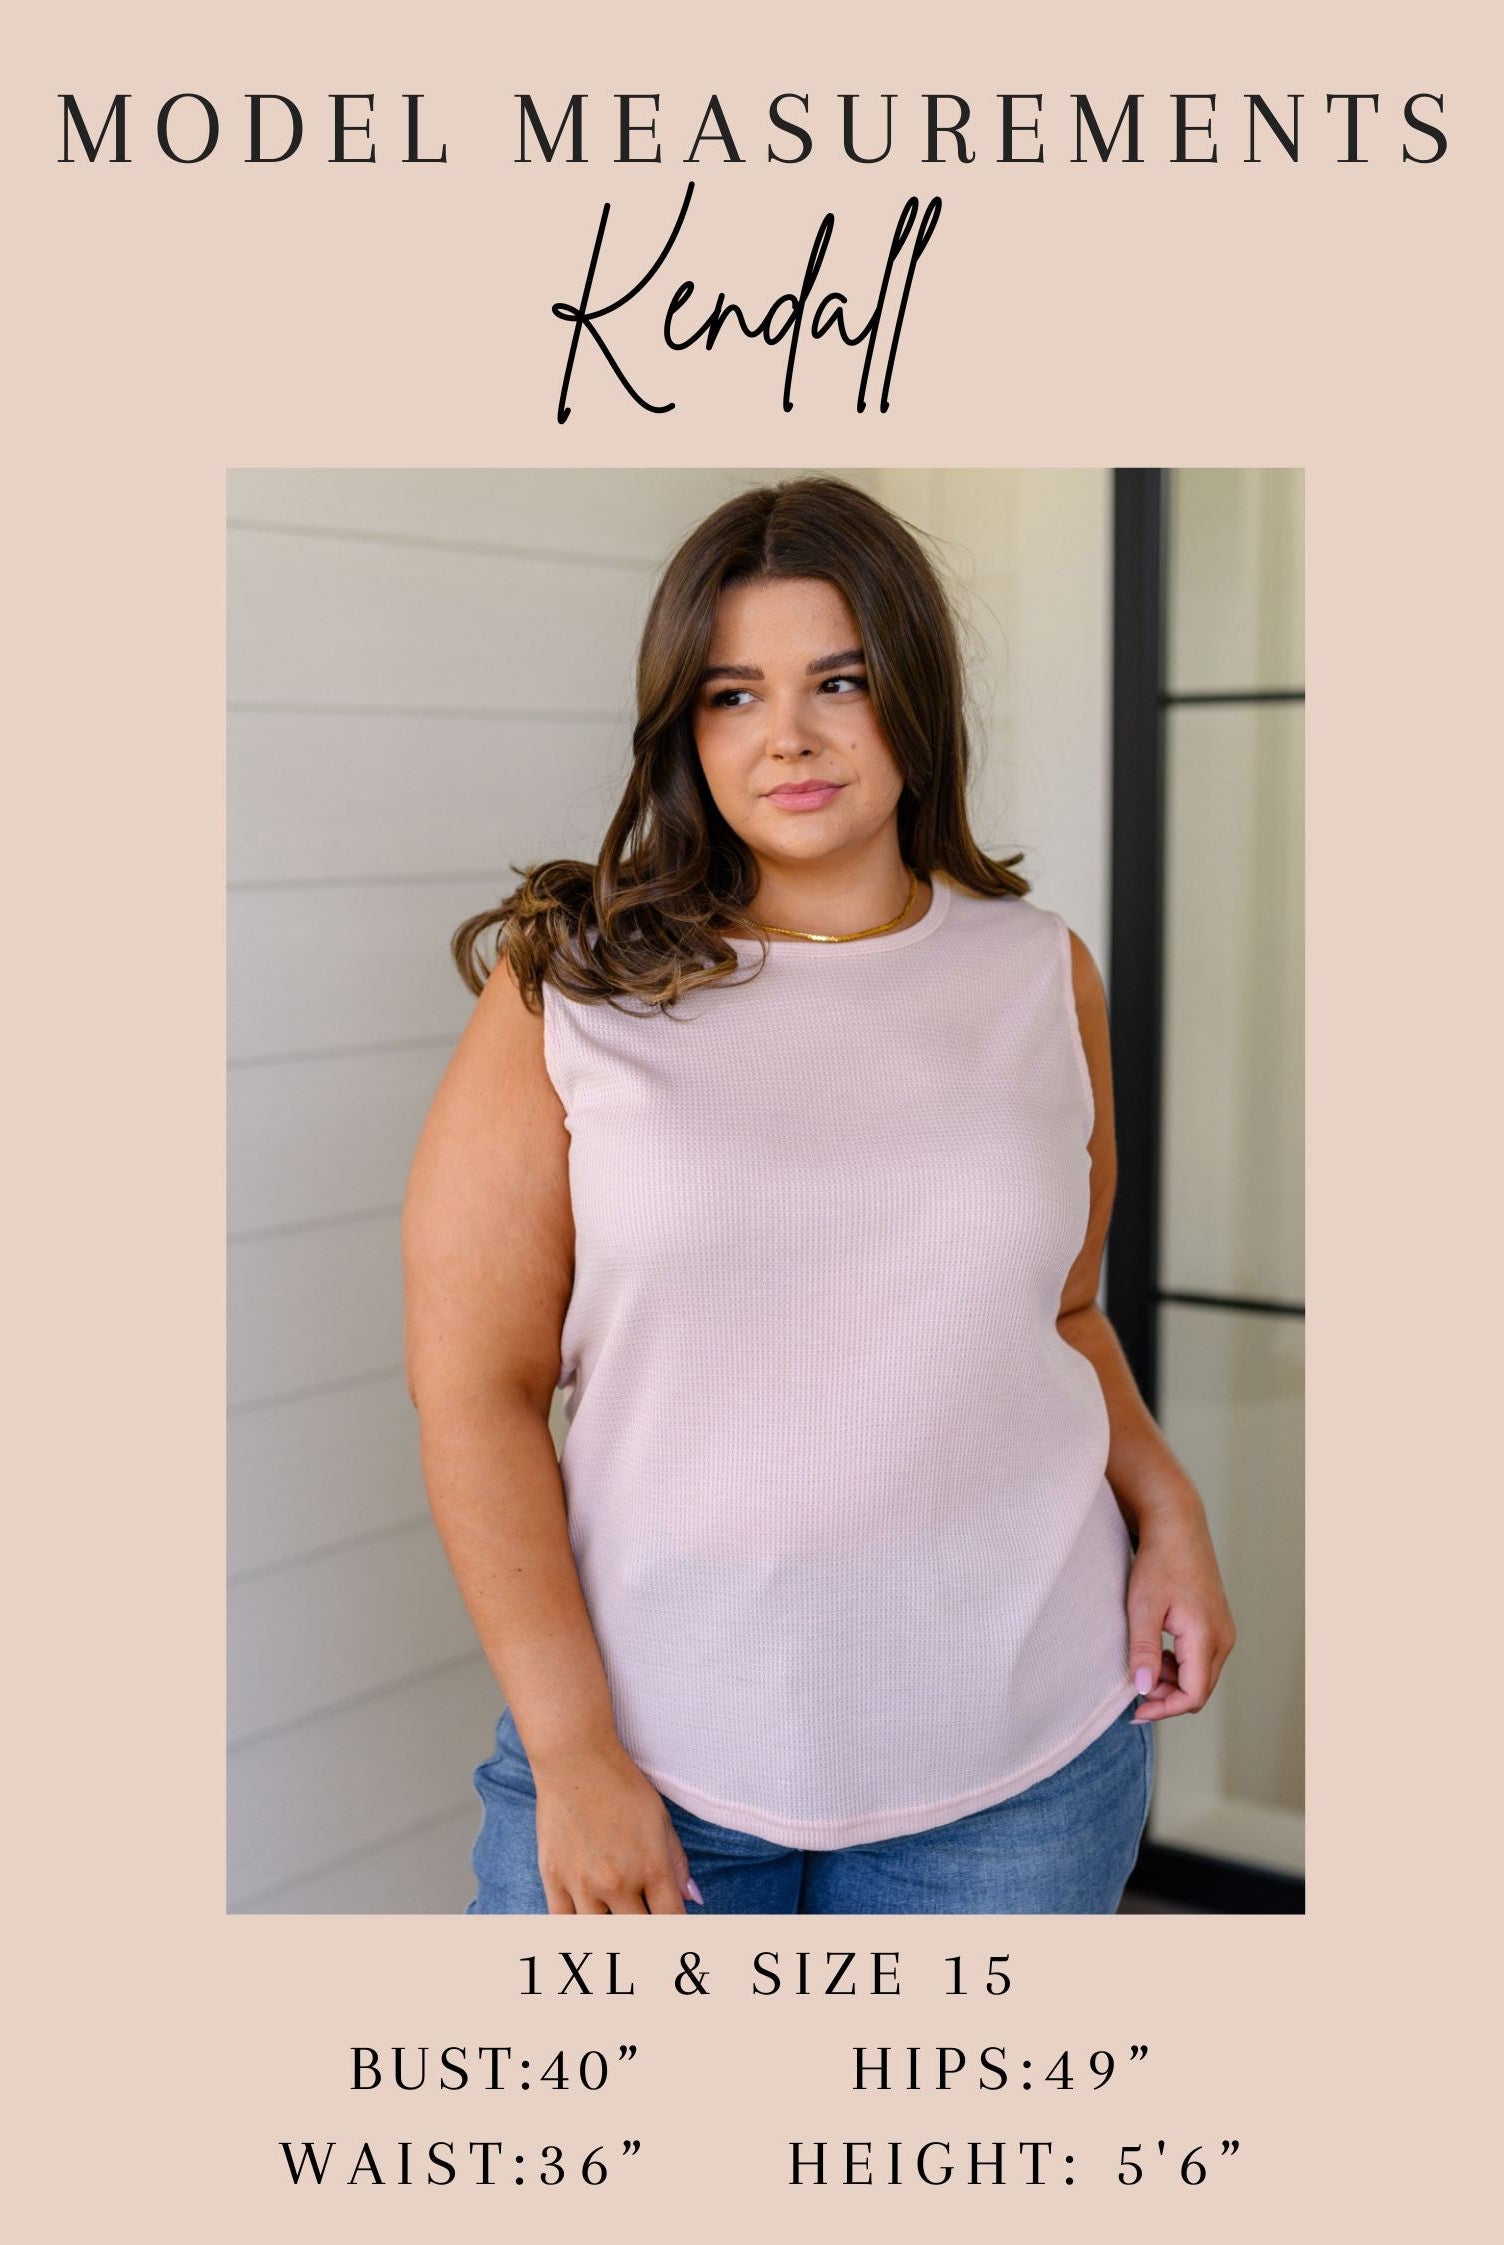 Lizzy Cap Sleeve Top in Black and Coral Floral-Short Sleeve Tops-Krush Kandy, Women's Online Fashion Boutique Located in Phoenix, Arizona (Scottsdale Area)